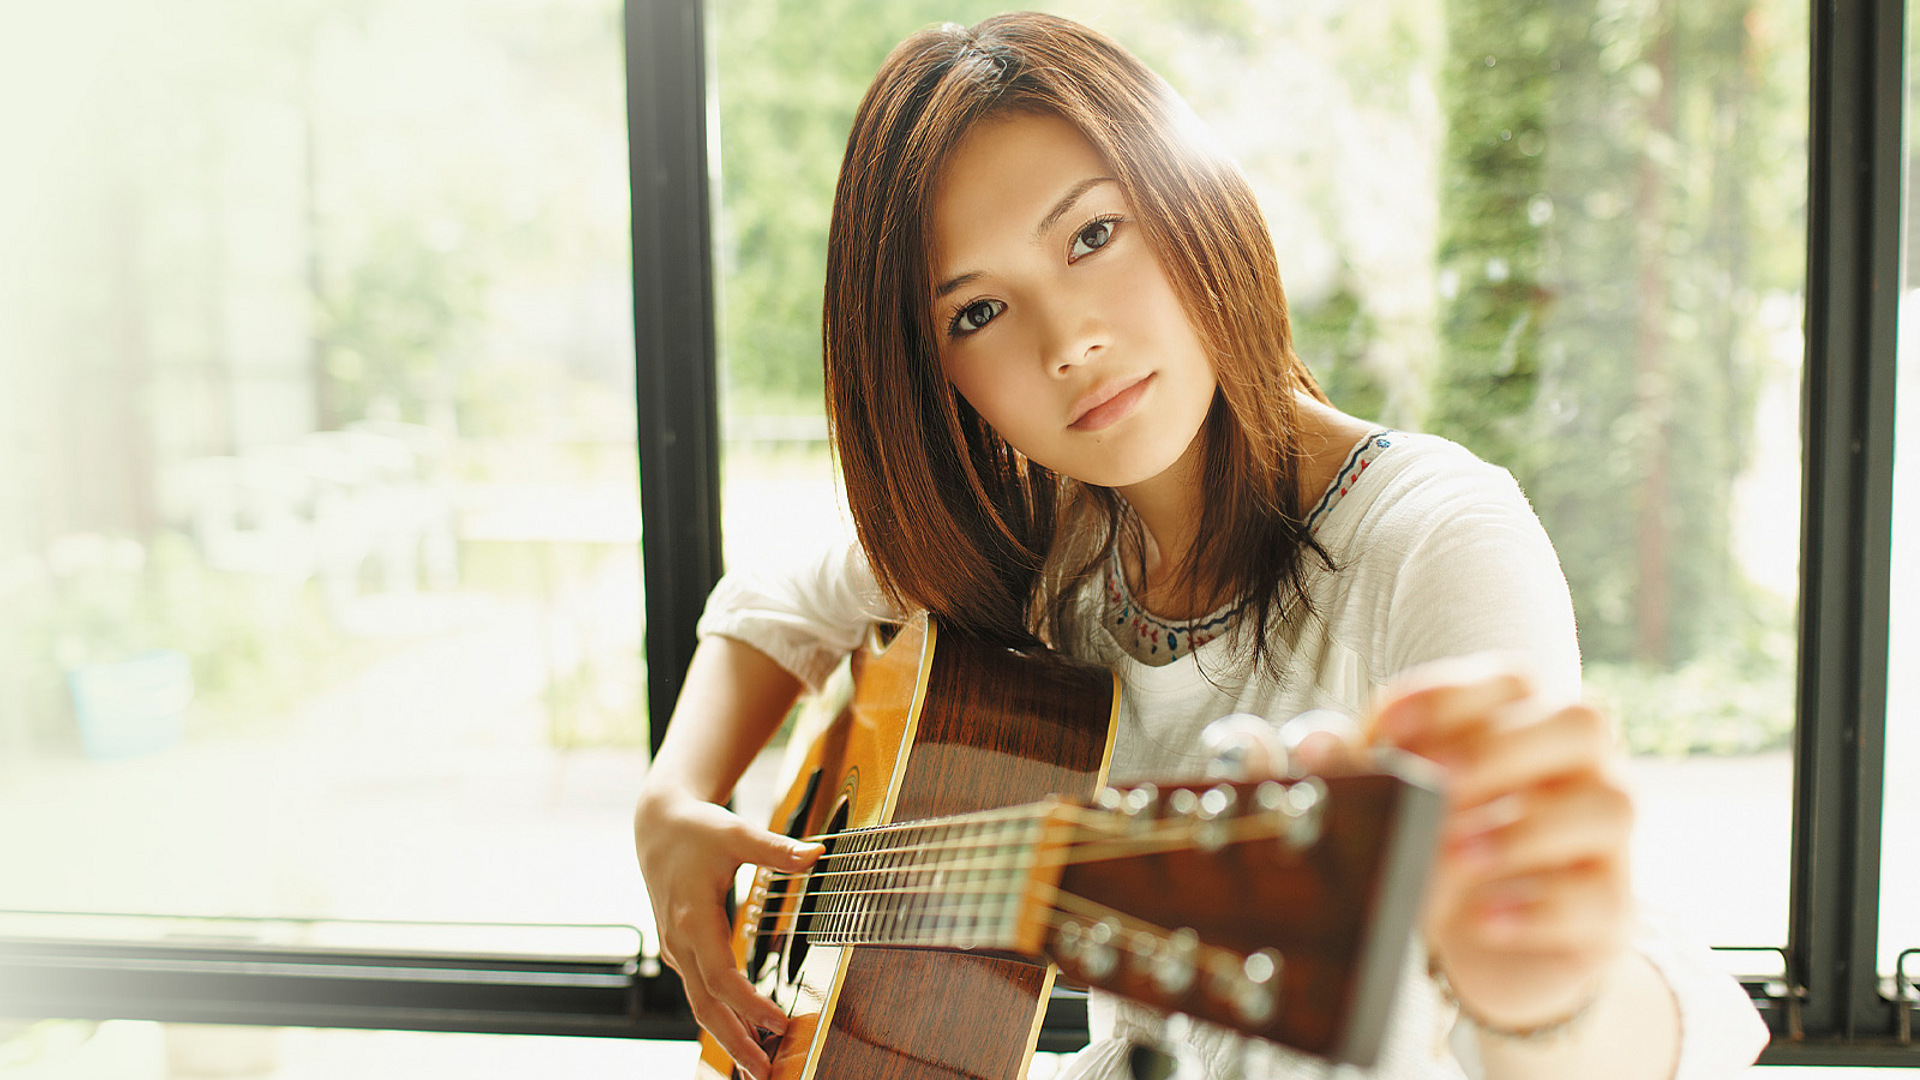 Yui Wallpapers Music Hq Yui Pictures 4k Wallpapers 2019